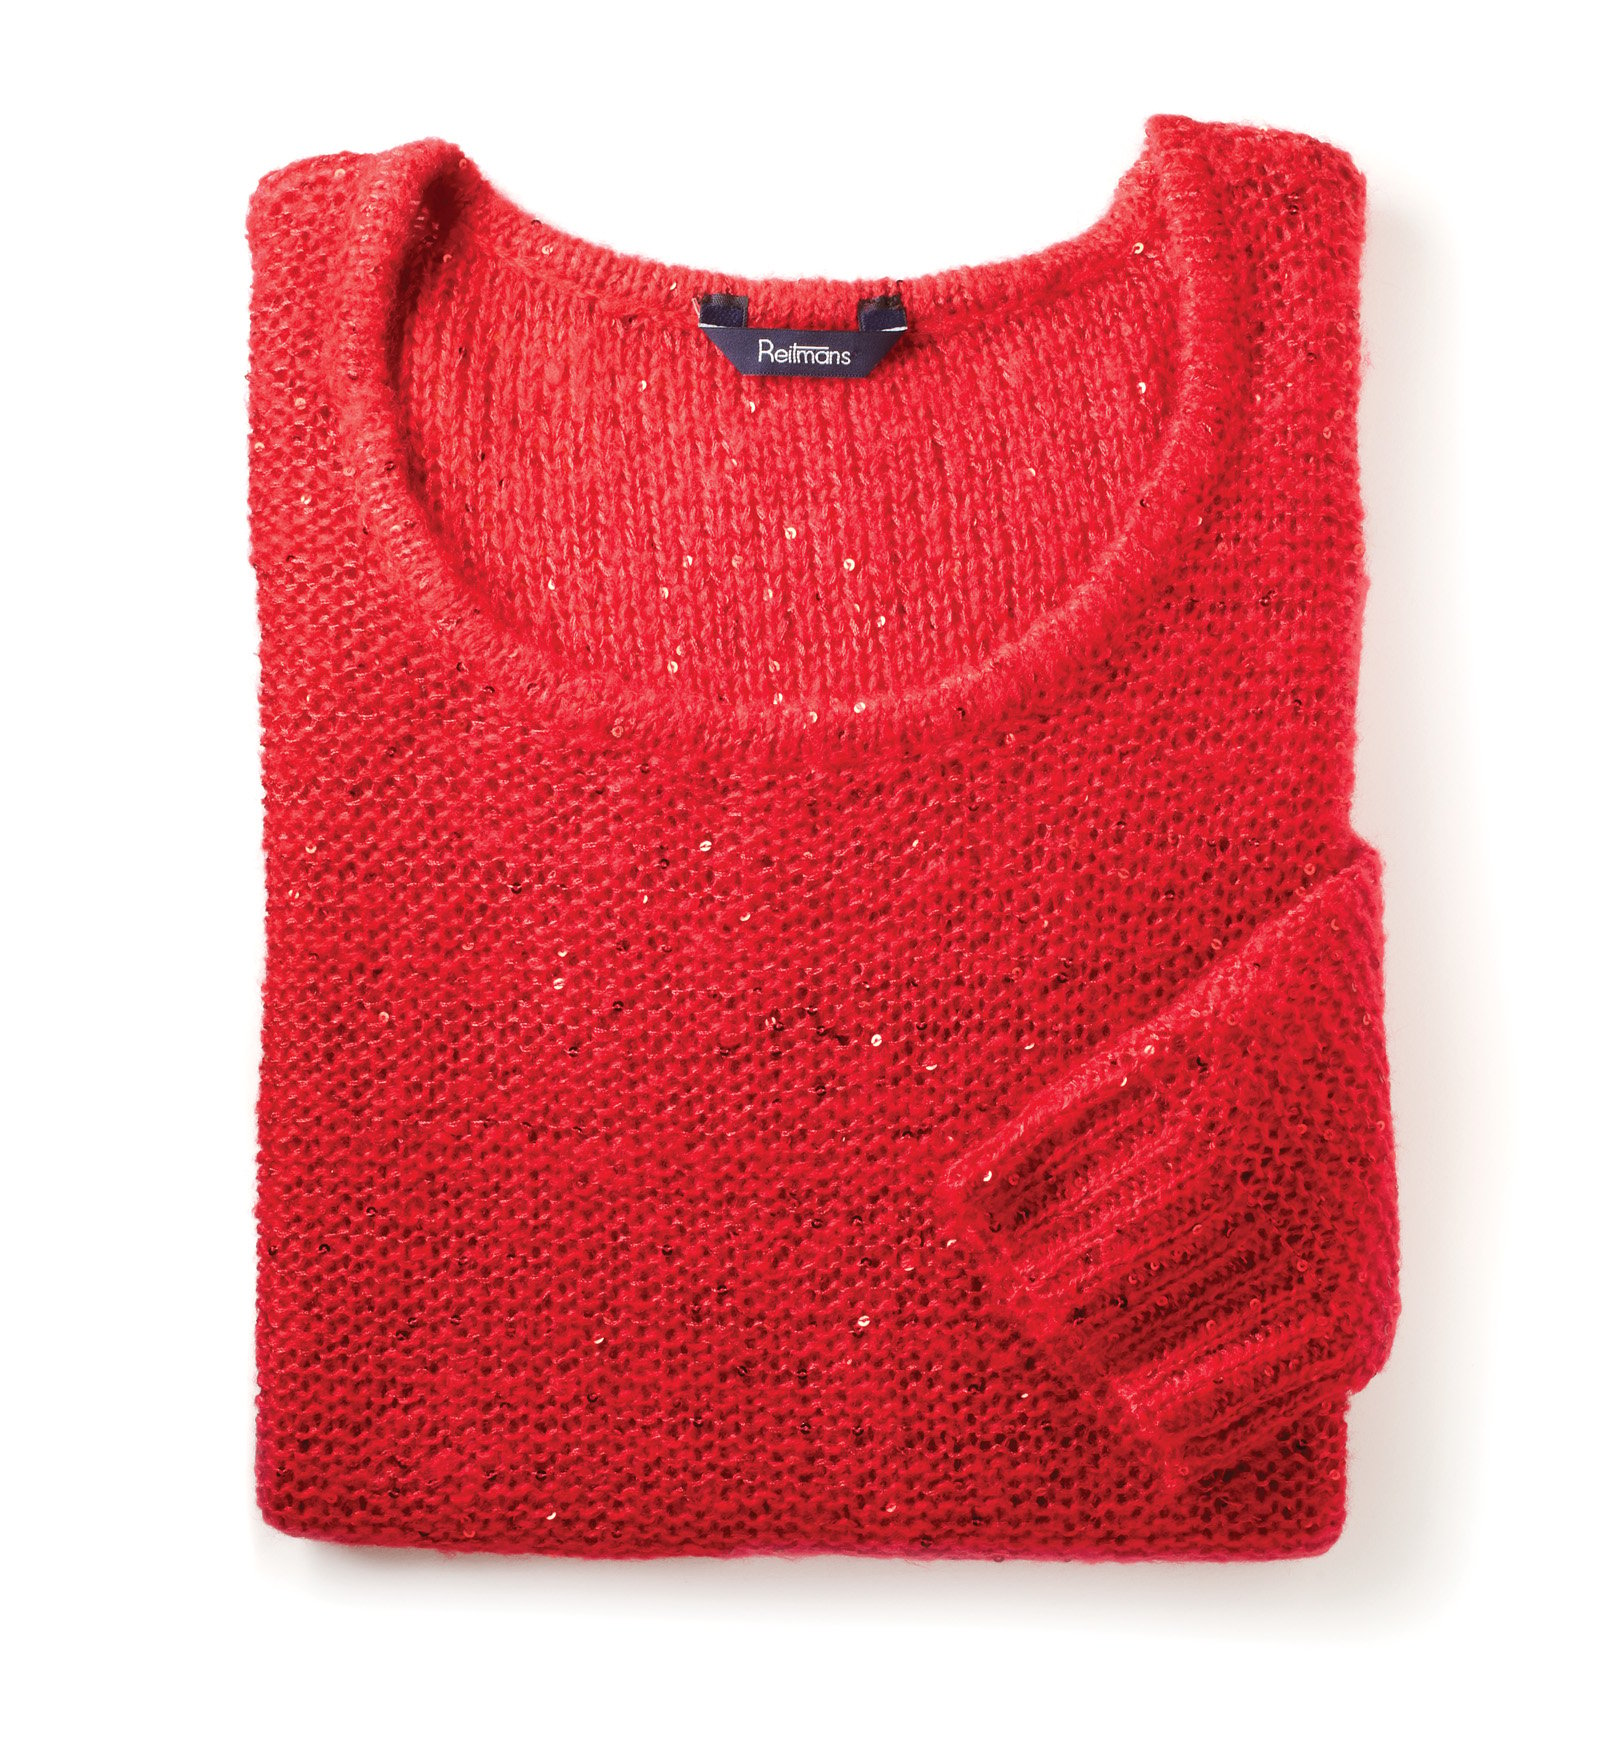 Four sparkly knits for the party season